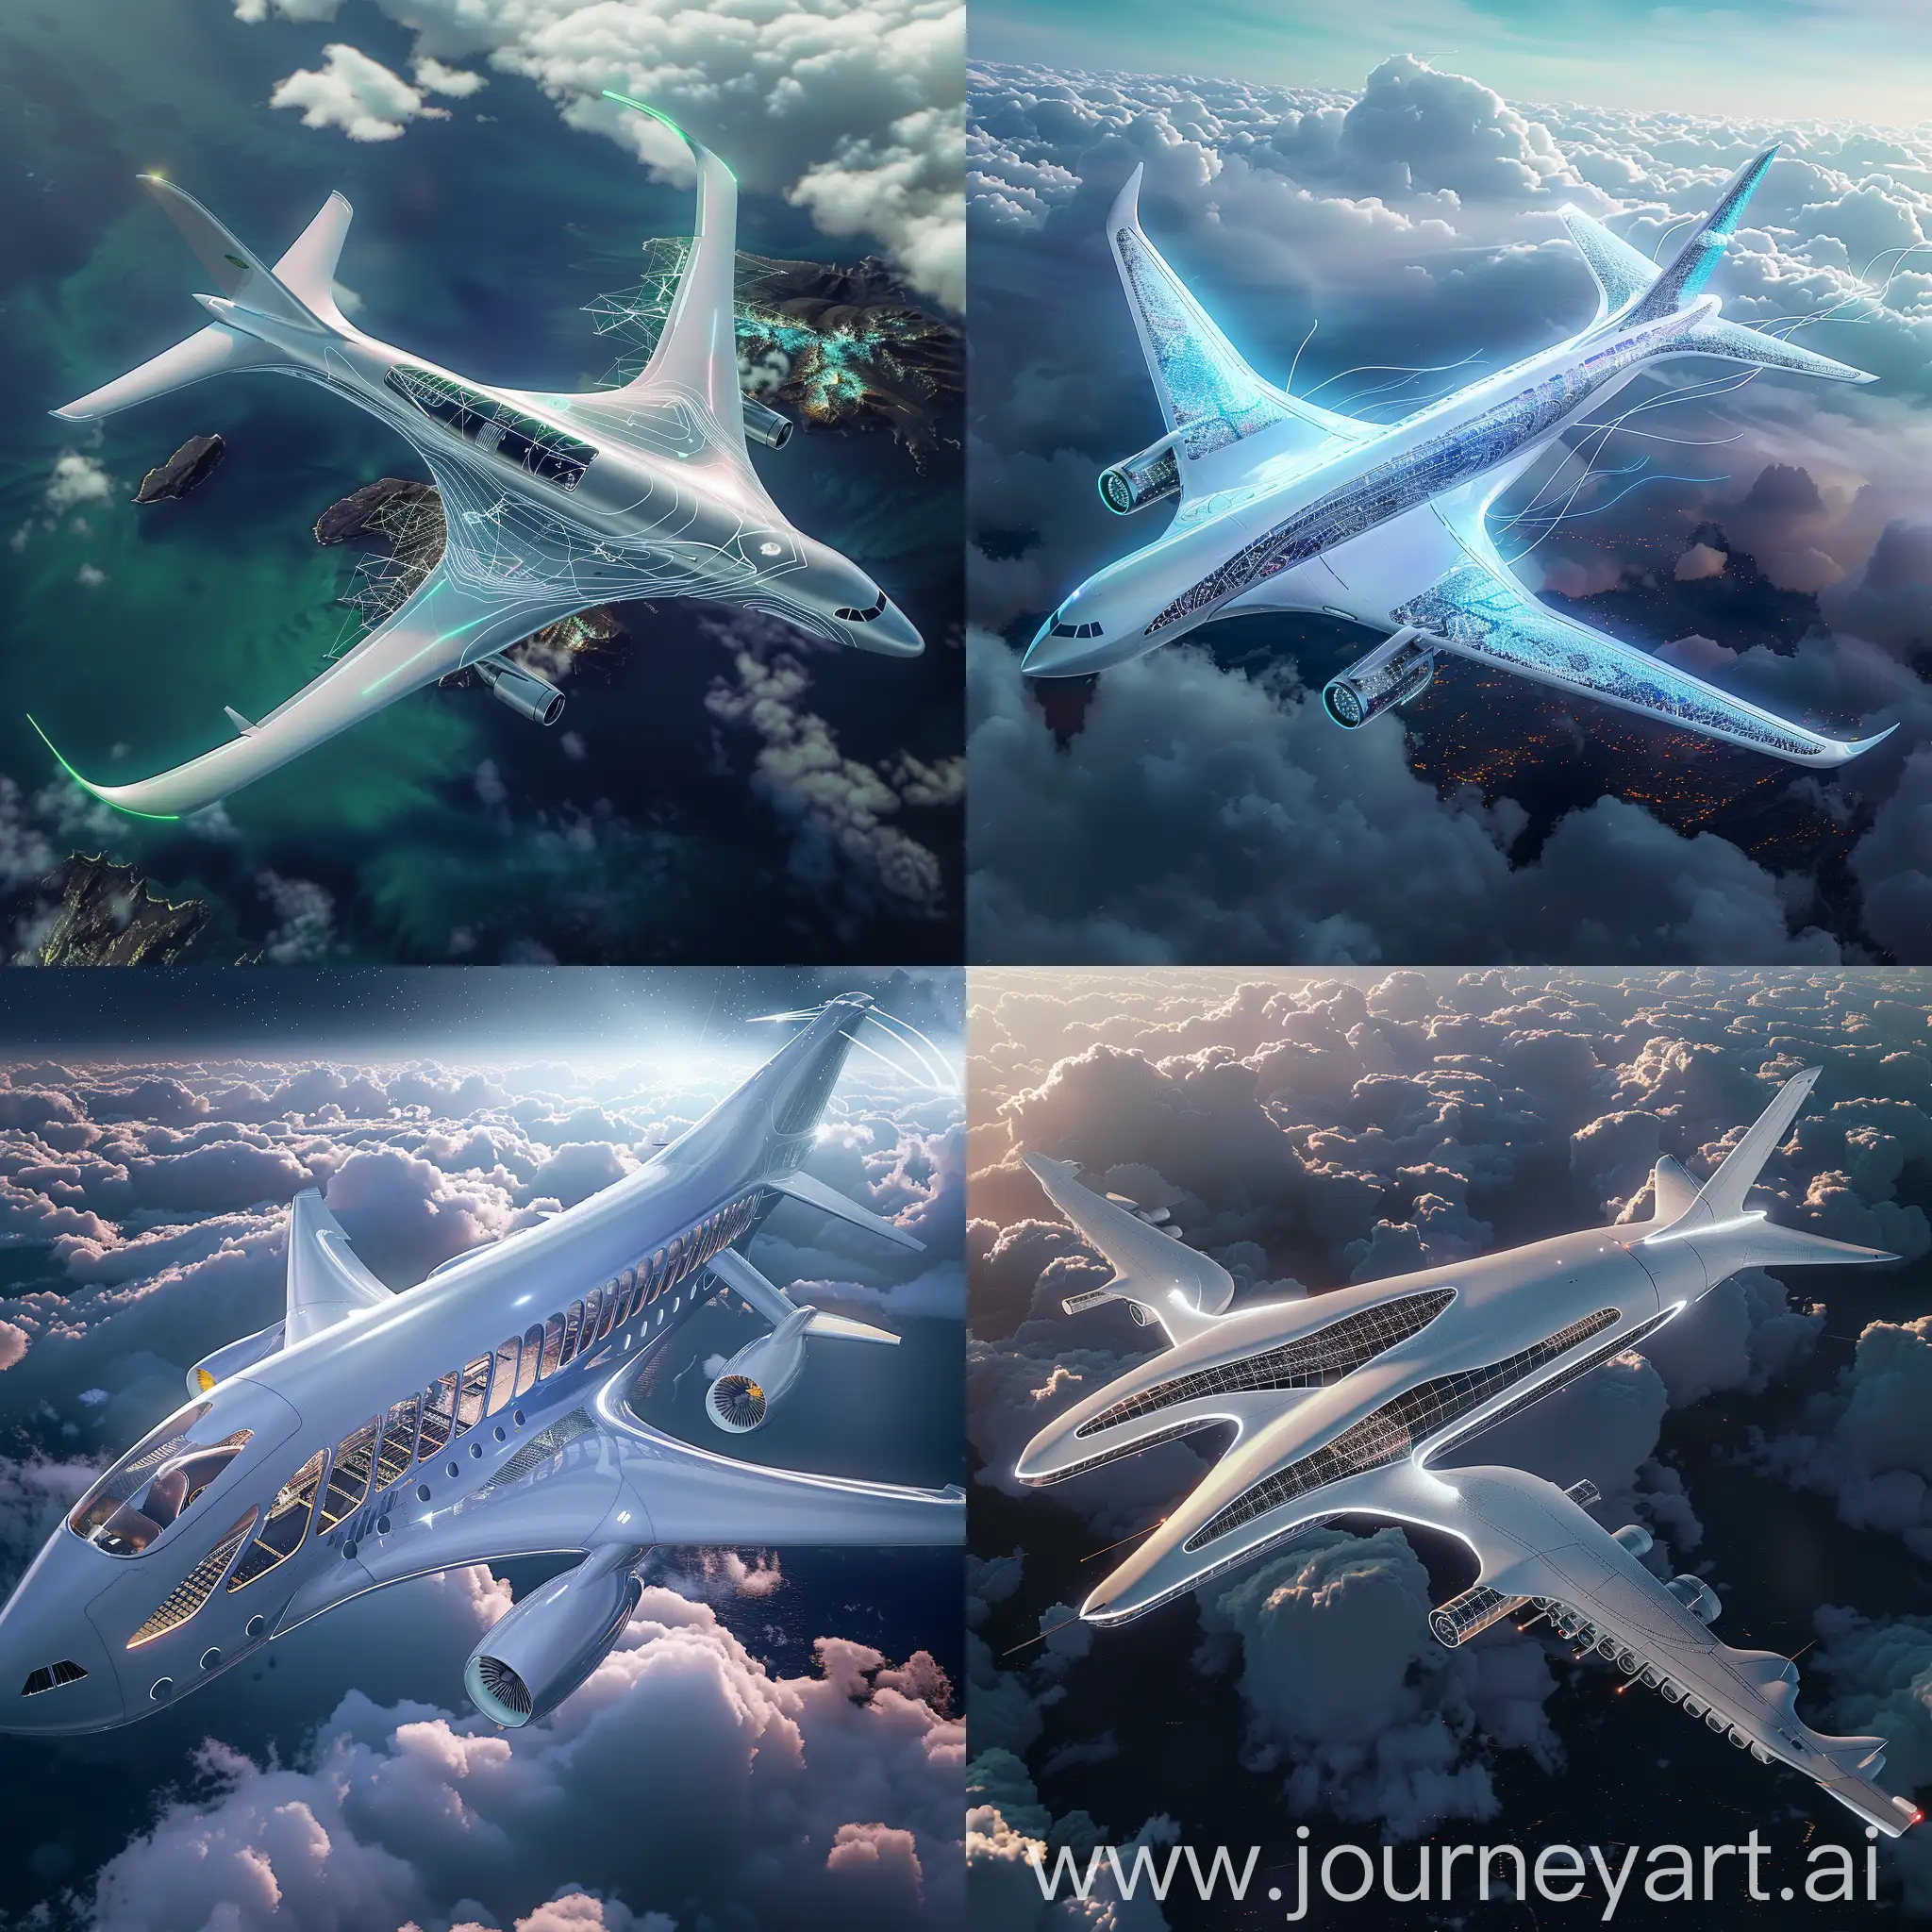 Futuristic passenger aircraft, in futuristic style, Biometric Boarding and Authentication, Adaptive Cabin Layouts, Virtual Reality (VR) Entertainment, Smart Materials and Self-Healing Surfaces, Personalized Climate Control, Biophilic Design Elements, Zero-Gravity Zones, Advanced Noise-Cancellation Technology, Holographic Flight Attendants, Integrated Health Monitoring Systems, Blended Wing Bodies (BWB), Active Flow Control Surfaces, Electric Propulsion Systems, Variable Geometry Wings, Integrated Solar Panels, Active Camouflage Systems, Bird Strike Protection, Hydrophobic Coatings, Advanced Lightning Protection, Biodegradable Materials, Mind-Controlled Interfaces, Holographic Displays and Interfaces, Augmented Reality (AR) Windows, In-Flight Gyms and Wellness Pods, 3D Printed Food and Beverages, Zero-Gravity Sleep Pods, Personalized AI Companions, Bioluminescent Cabin Lighting, Nanotechnology-Based Air Filtration Systems, Self-Configuring Cabin Spaces, Shape-Memory Alloy Morphing, Dynamic Solar Skin, Nanotechnology Coating, Metamaterial Cloaking, Hyper-Efficient Propulsion Systems:, Bio-Inspired Active Camouflage, Inflatable Emergency Escape Systems, Dynamic Wing Morphing, Electrochromic Windows, Self-Healing Structural Materials, unreal engine 5 --stylize 1000